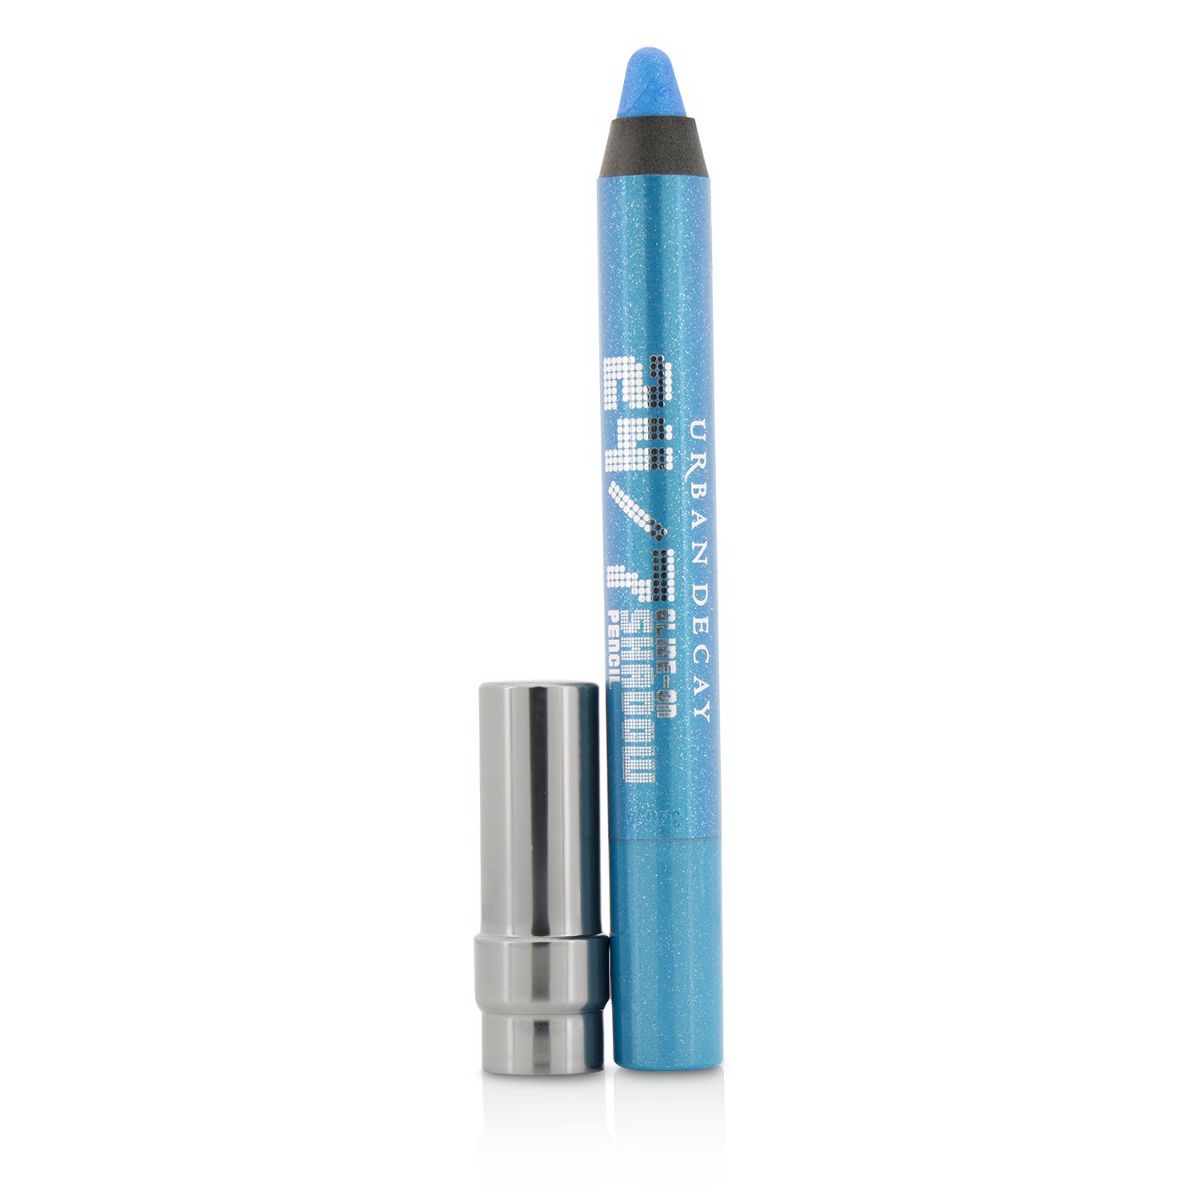 24/7 Glide On Shadow Pencil - Clash (Unboxed) Urban Decay Image